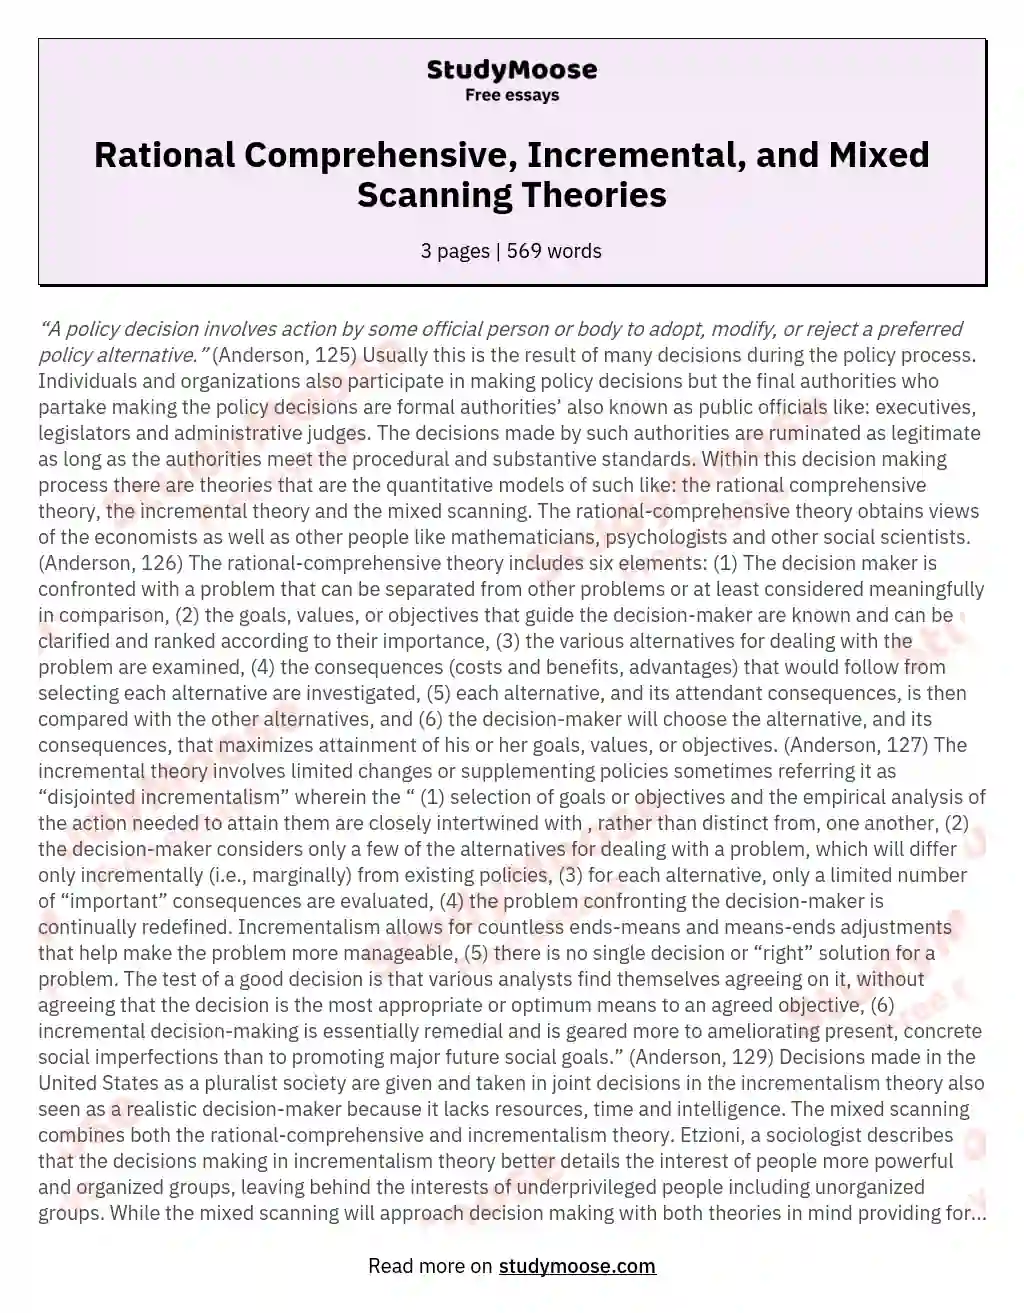 Rational Comprehensive, Incremental, and Mixed Scanning Theories essay